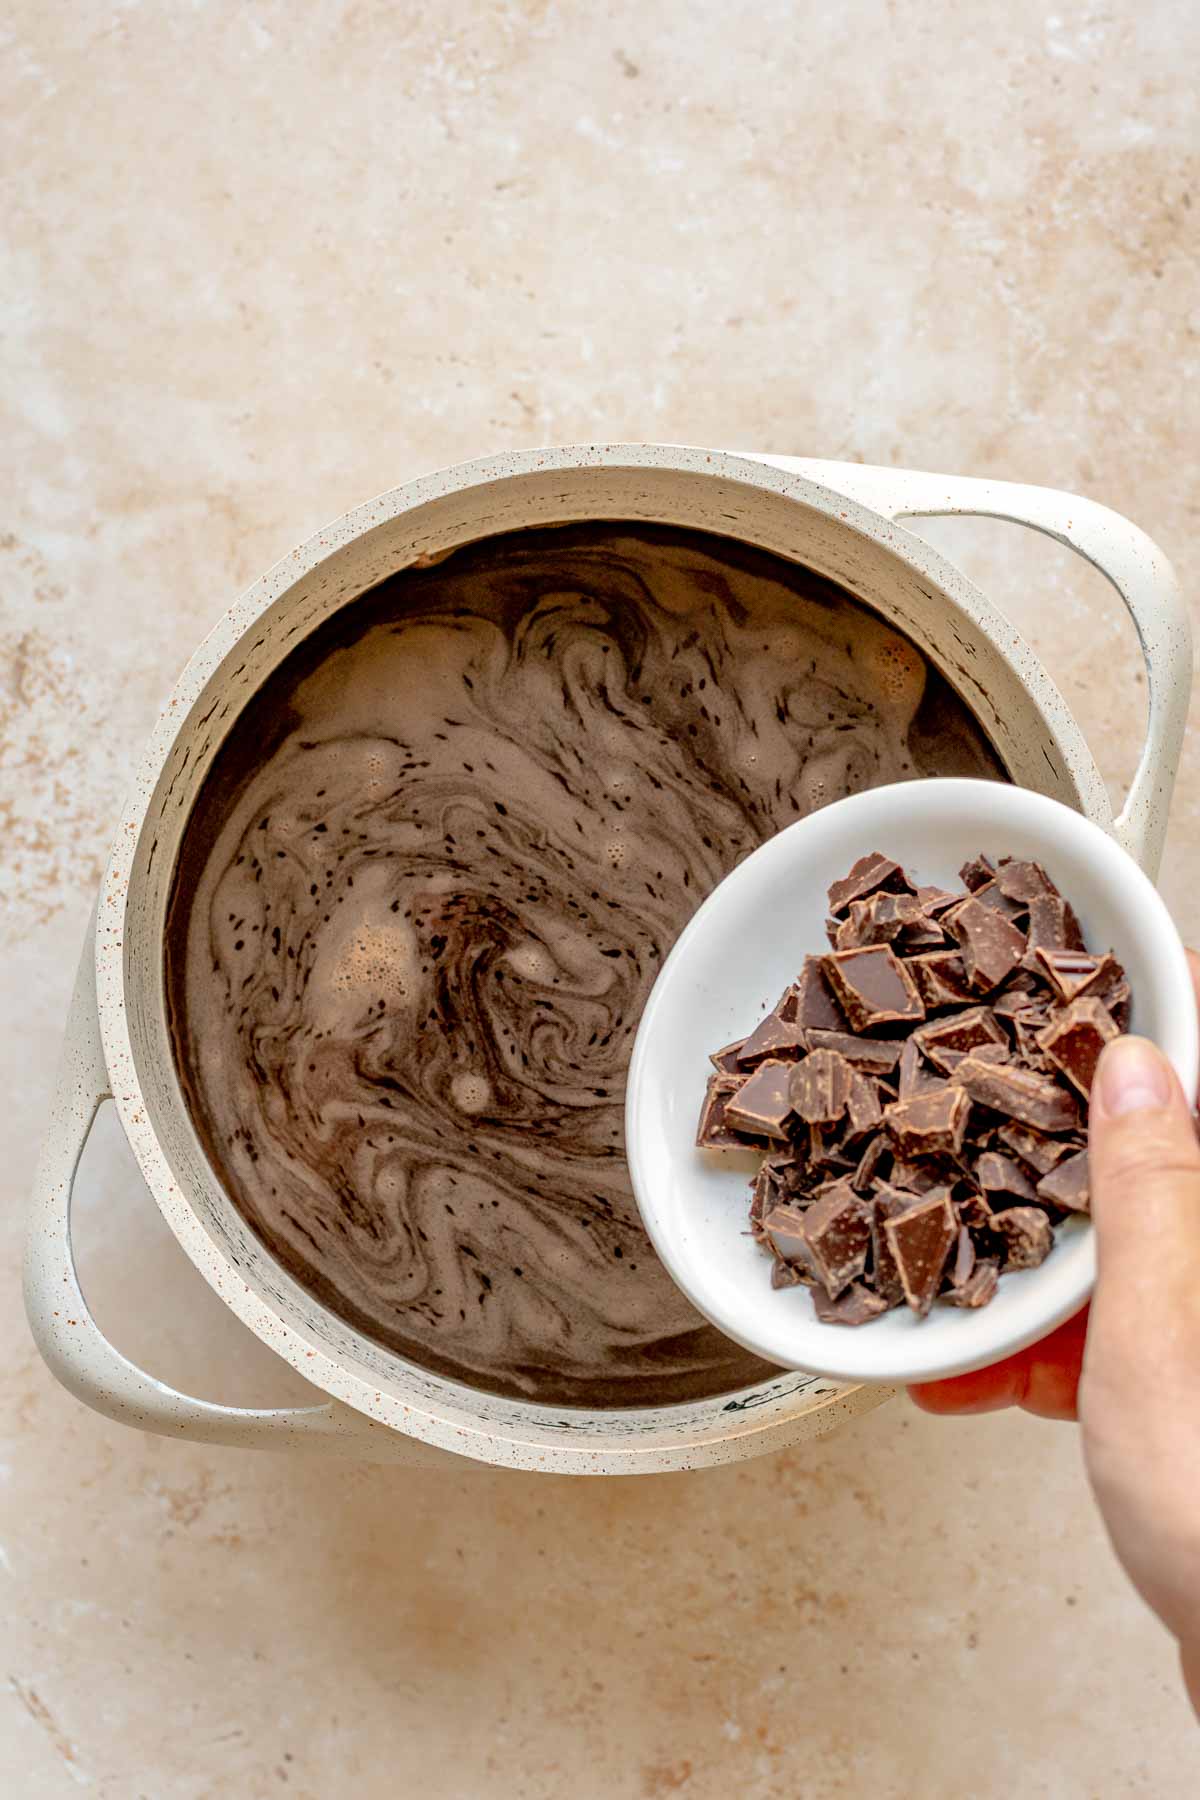 A hand pours chopped chocolate into hot cocoa in a saucepan.